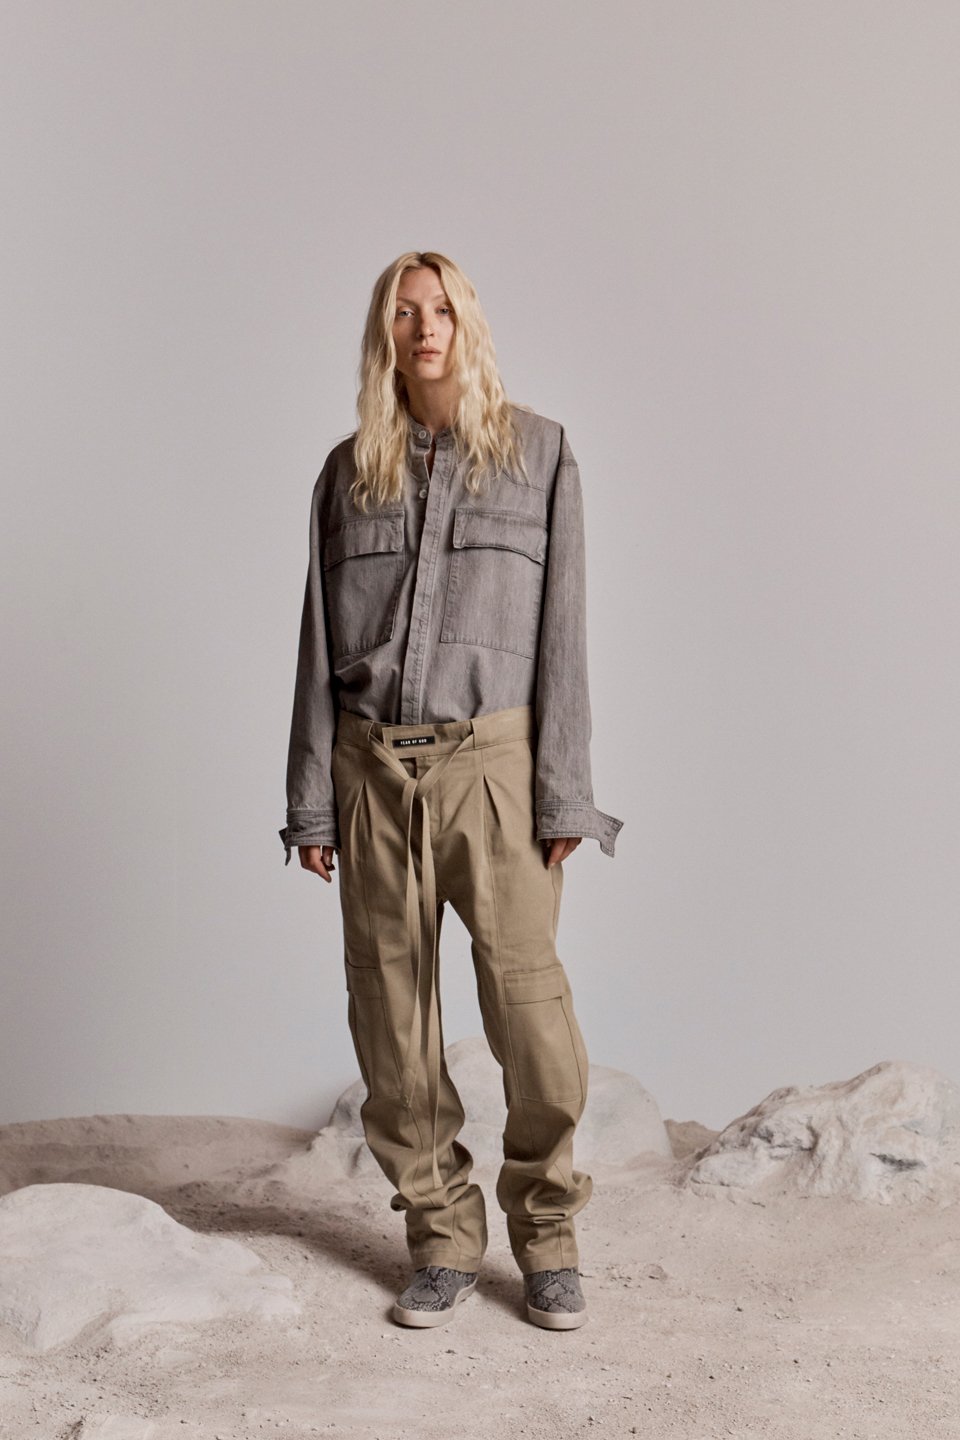 Fear of God Debuts Sixth Collection Lookbook Featuring Jared Leto